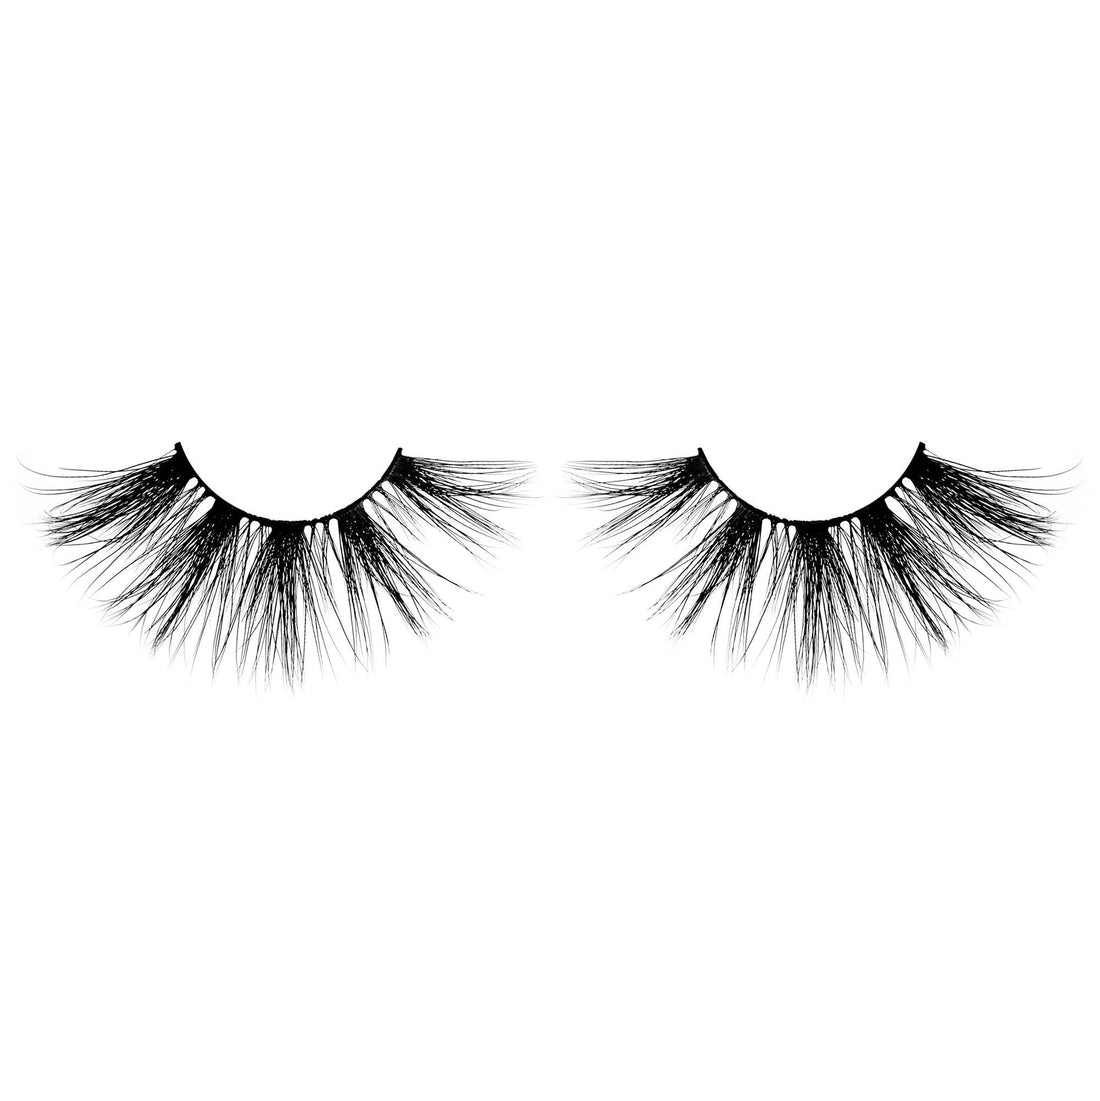 Glamour Us_Beauty Creations_Lashes_ATTENTION SEEKER 35 MM Faux Mink Lashes__BC-35MMFL-AS